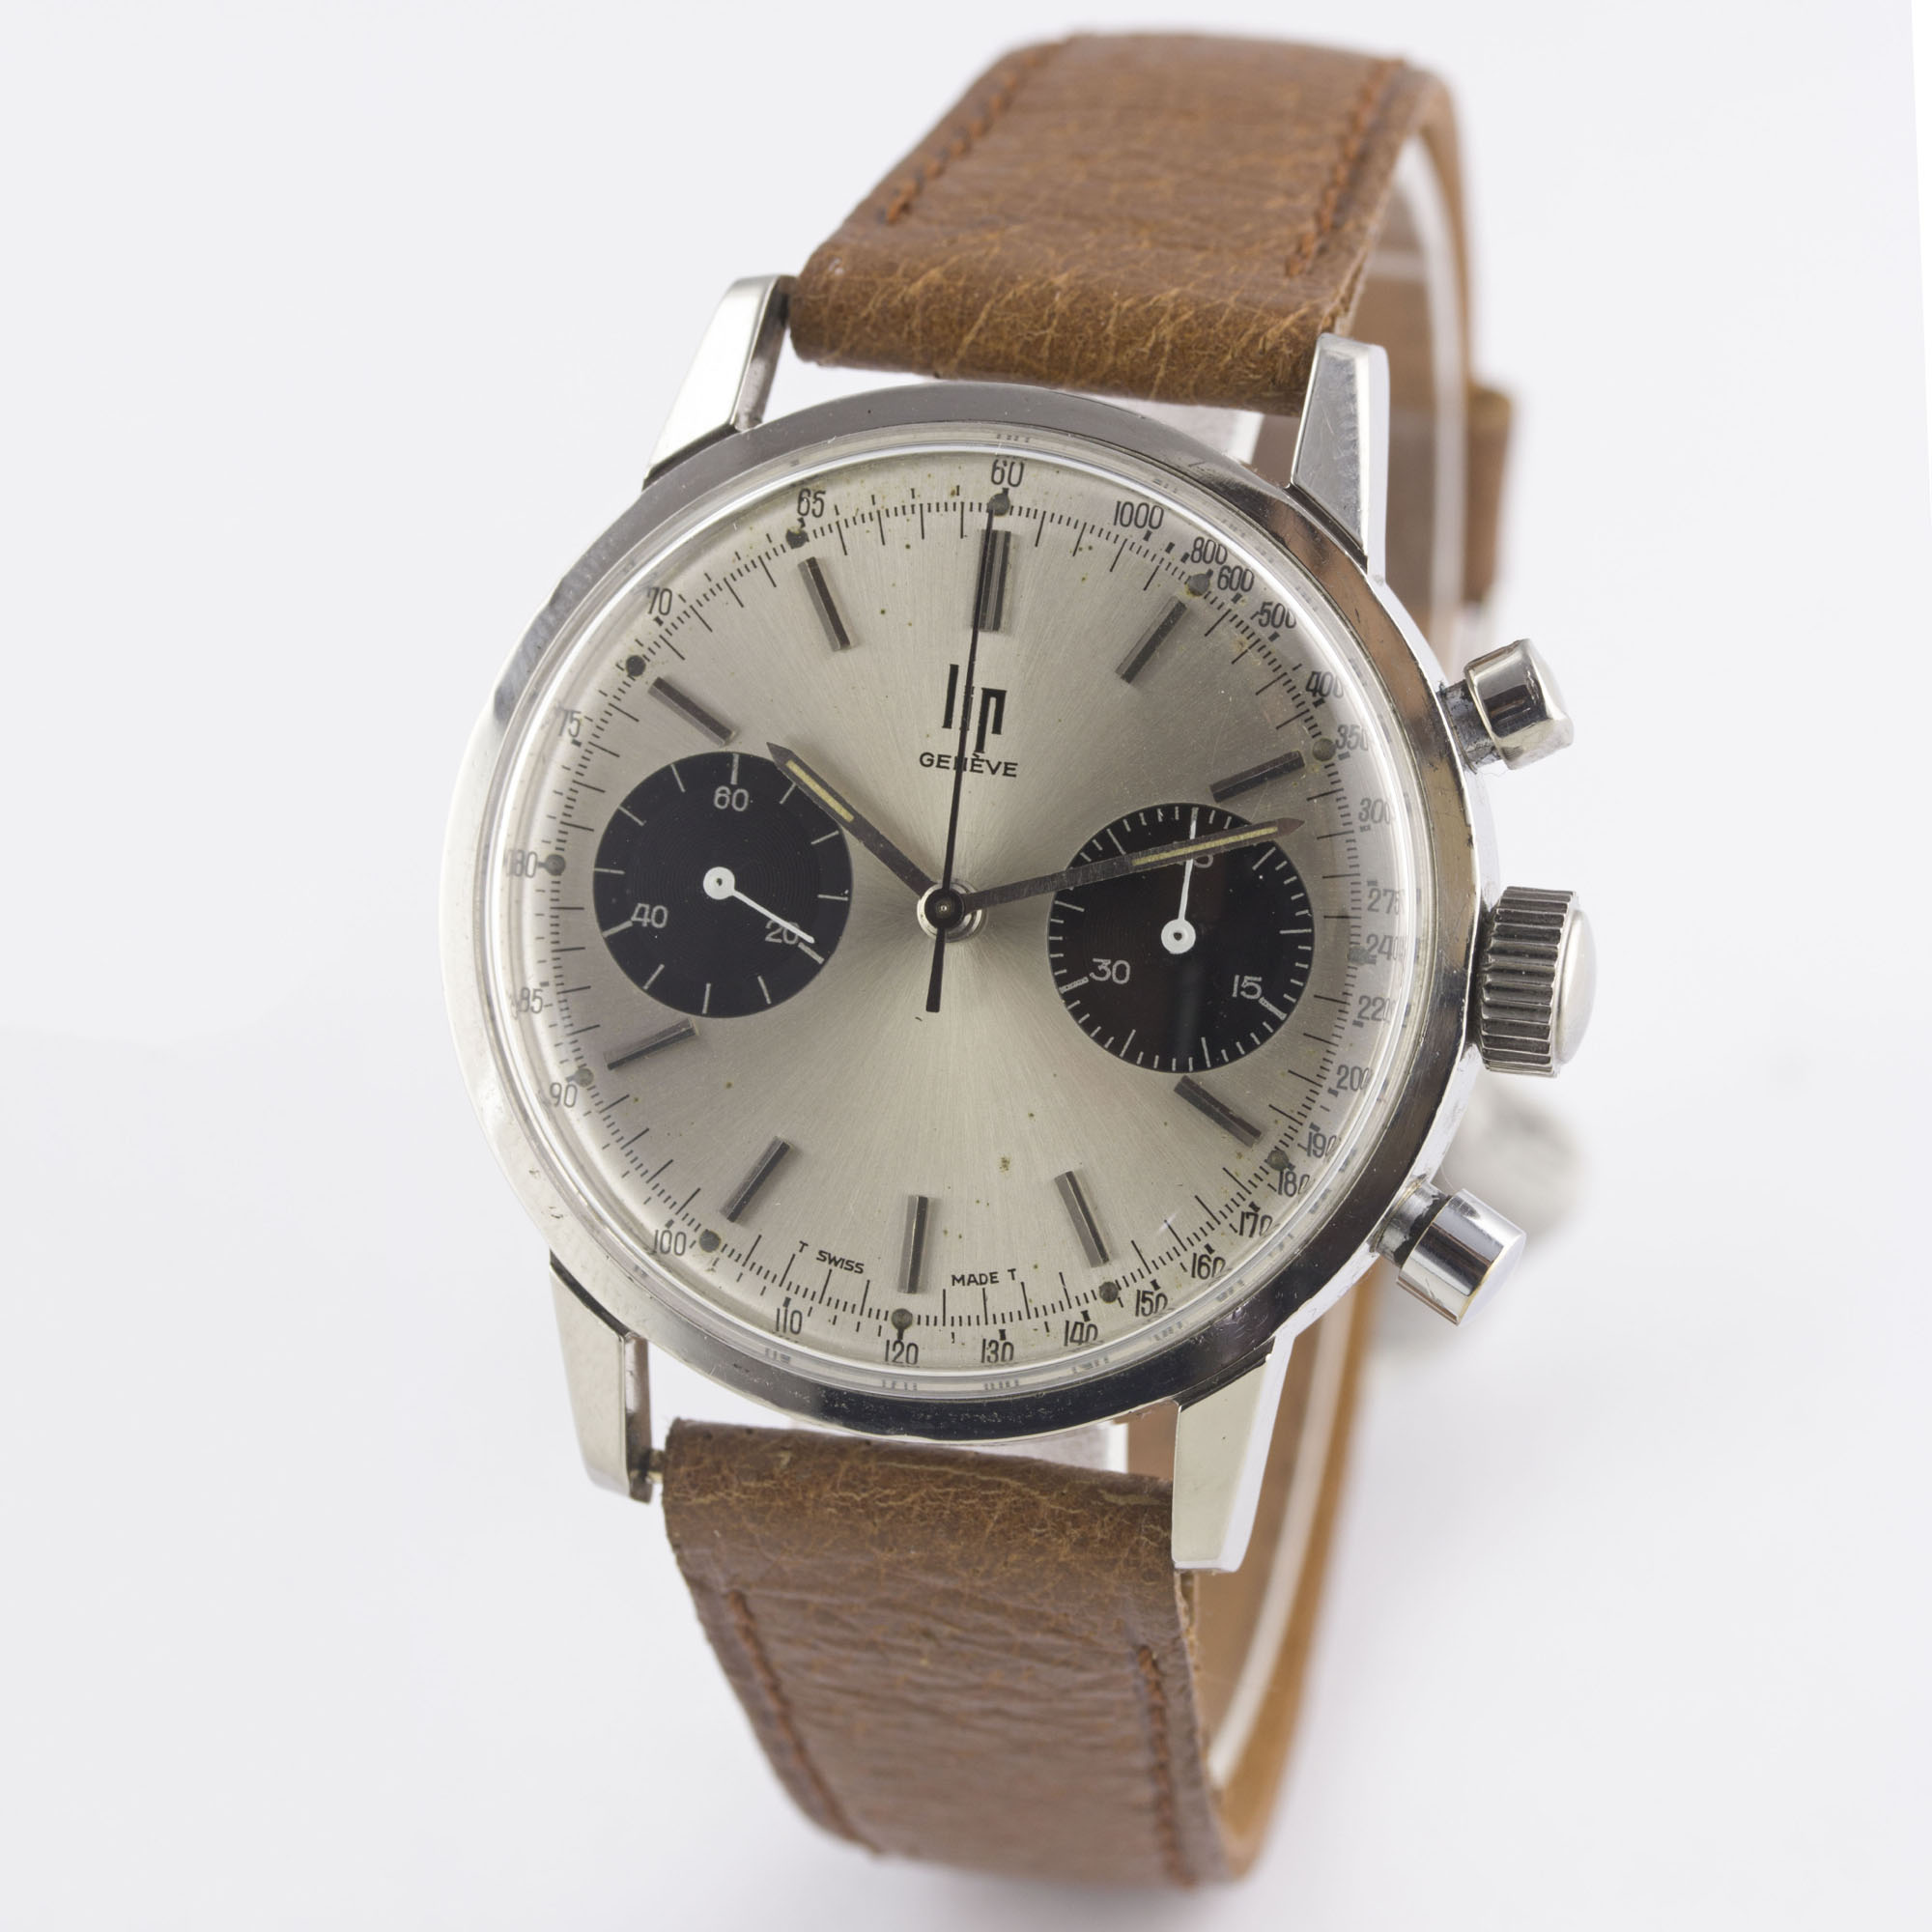 A RARE GENTLEMAN'S STAINLESS STEEL LIP "TOP TIME" CHRONOGRAPH WRIST WATCH CIRCA 1960s, WITH " - Image 4 of 8